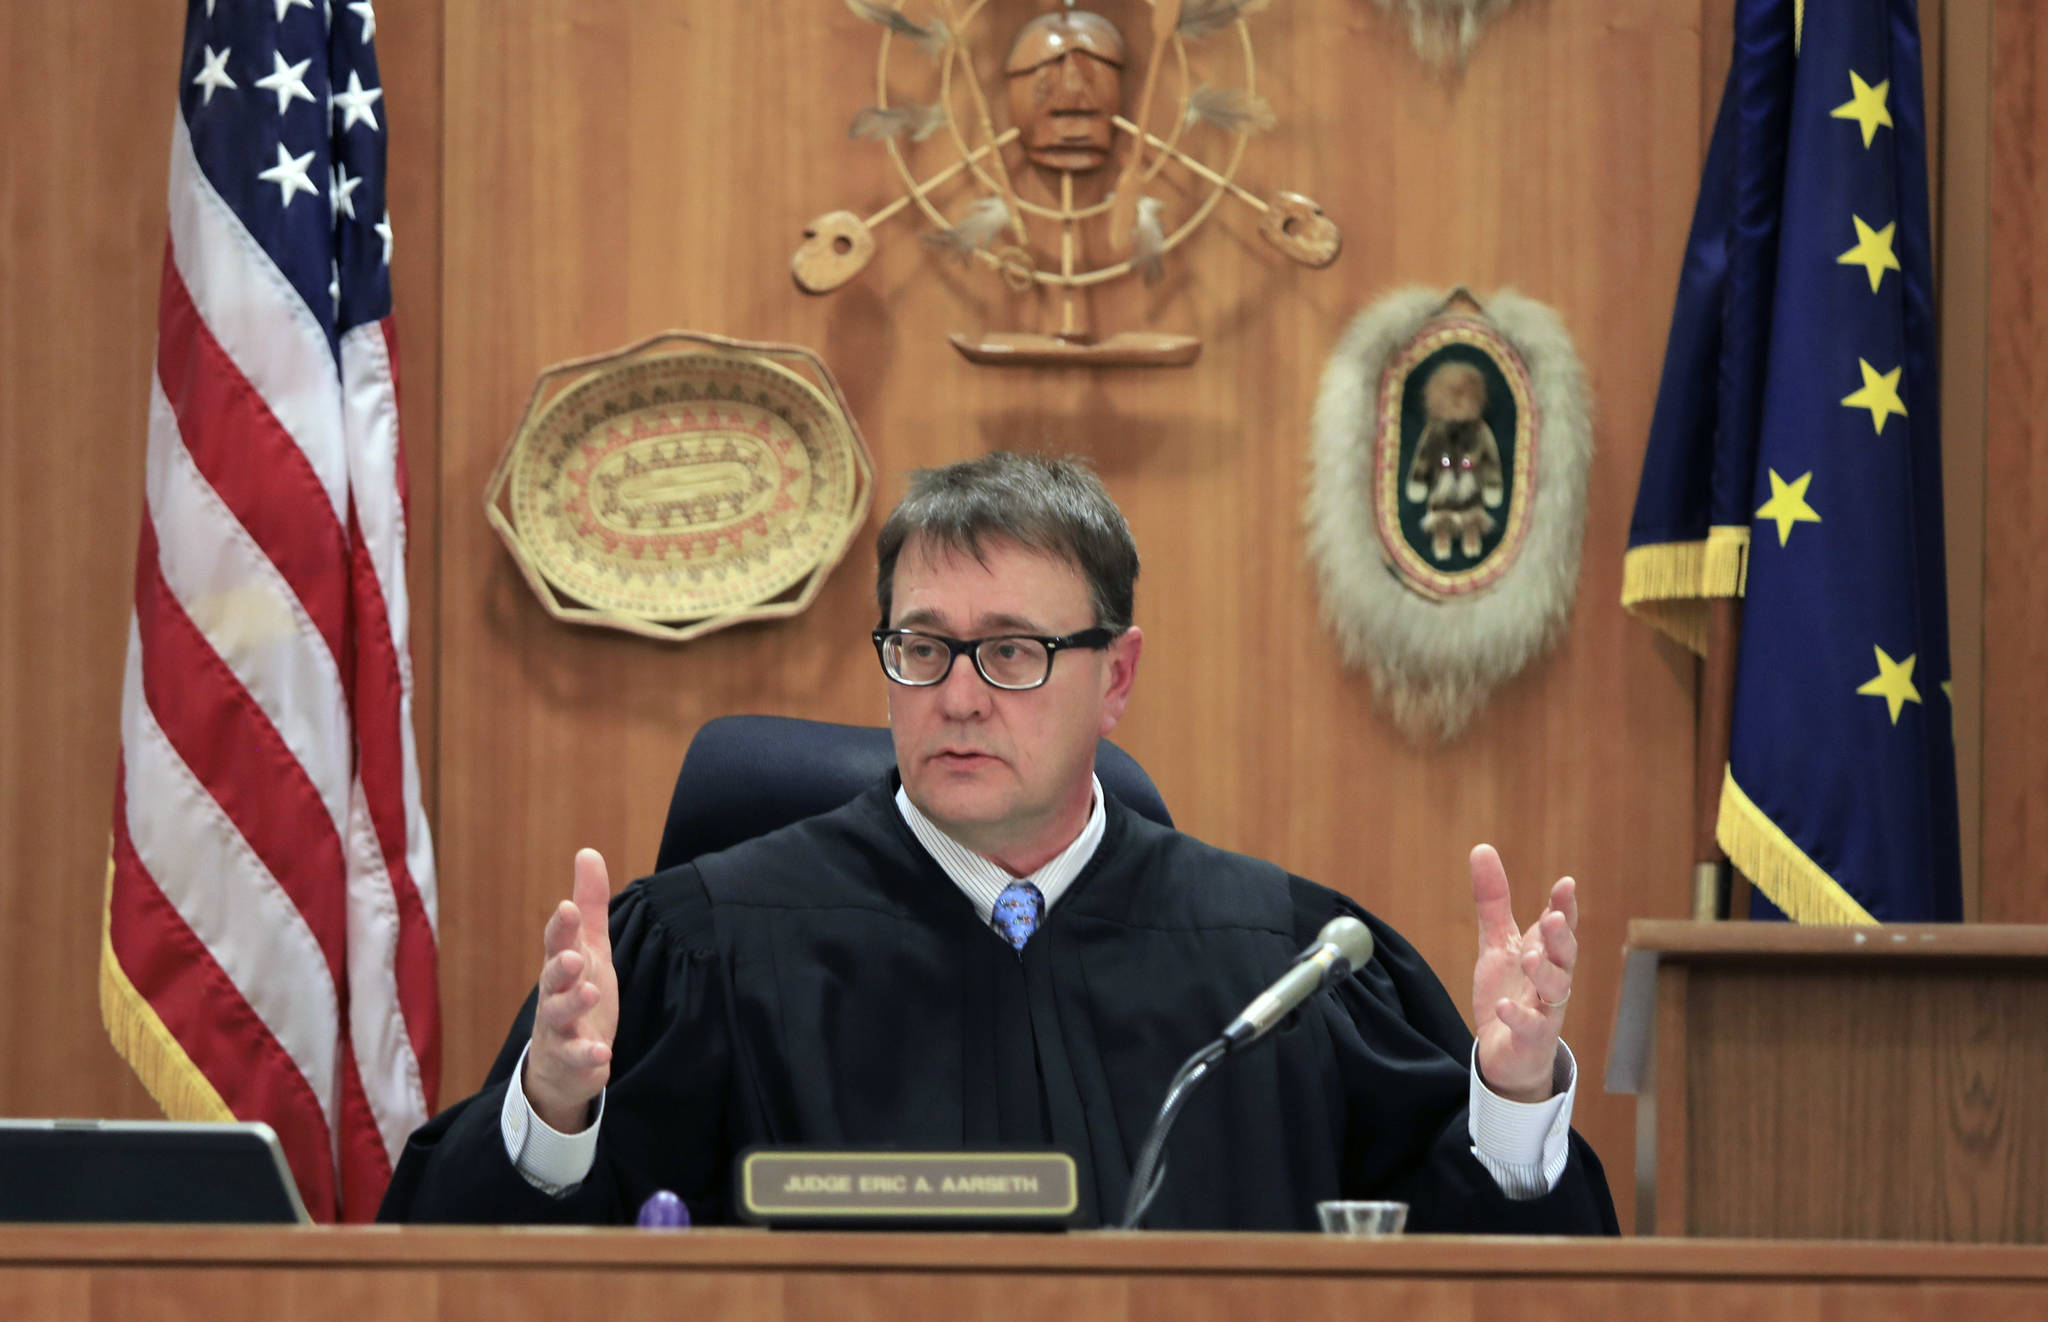 Anchorage Superior Court Judge Eric Aarseth speaks at an appeal of a recount in a Fairbanks state house race on Thursday, Dec. 20, 2018, in Anchorage, Alaska. The Alaska Supreme Court appointed Aarseth as a special master to prepare a report on an appeal of a recount in the race between Republican Bart LeBon and Democrat Kathryn Dodge. LeBon held a one-vote lead after the recount. (AP Photo/Dan Joling)